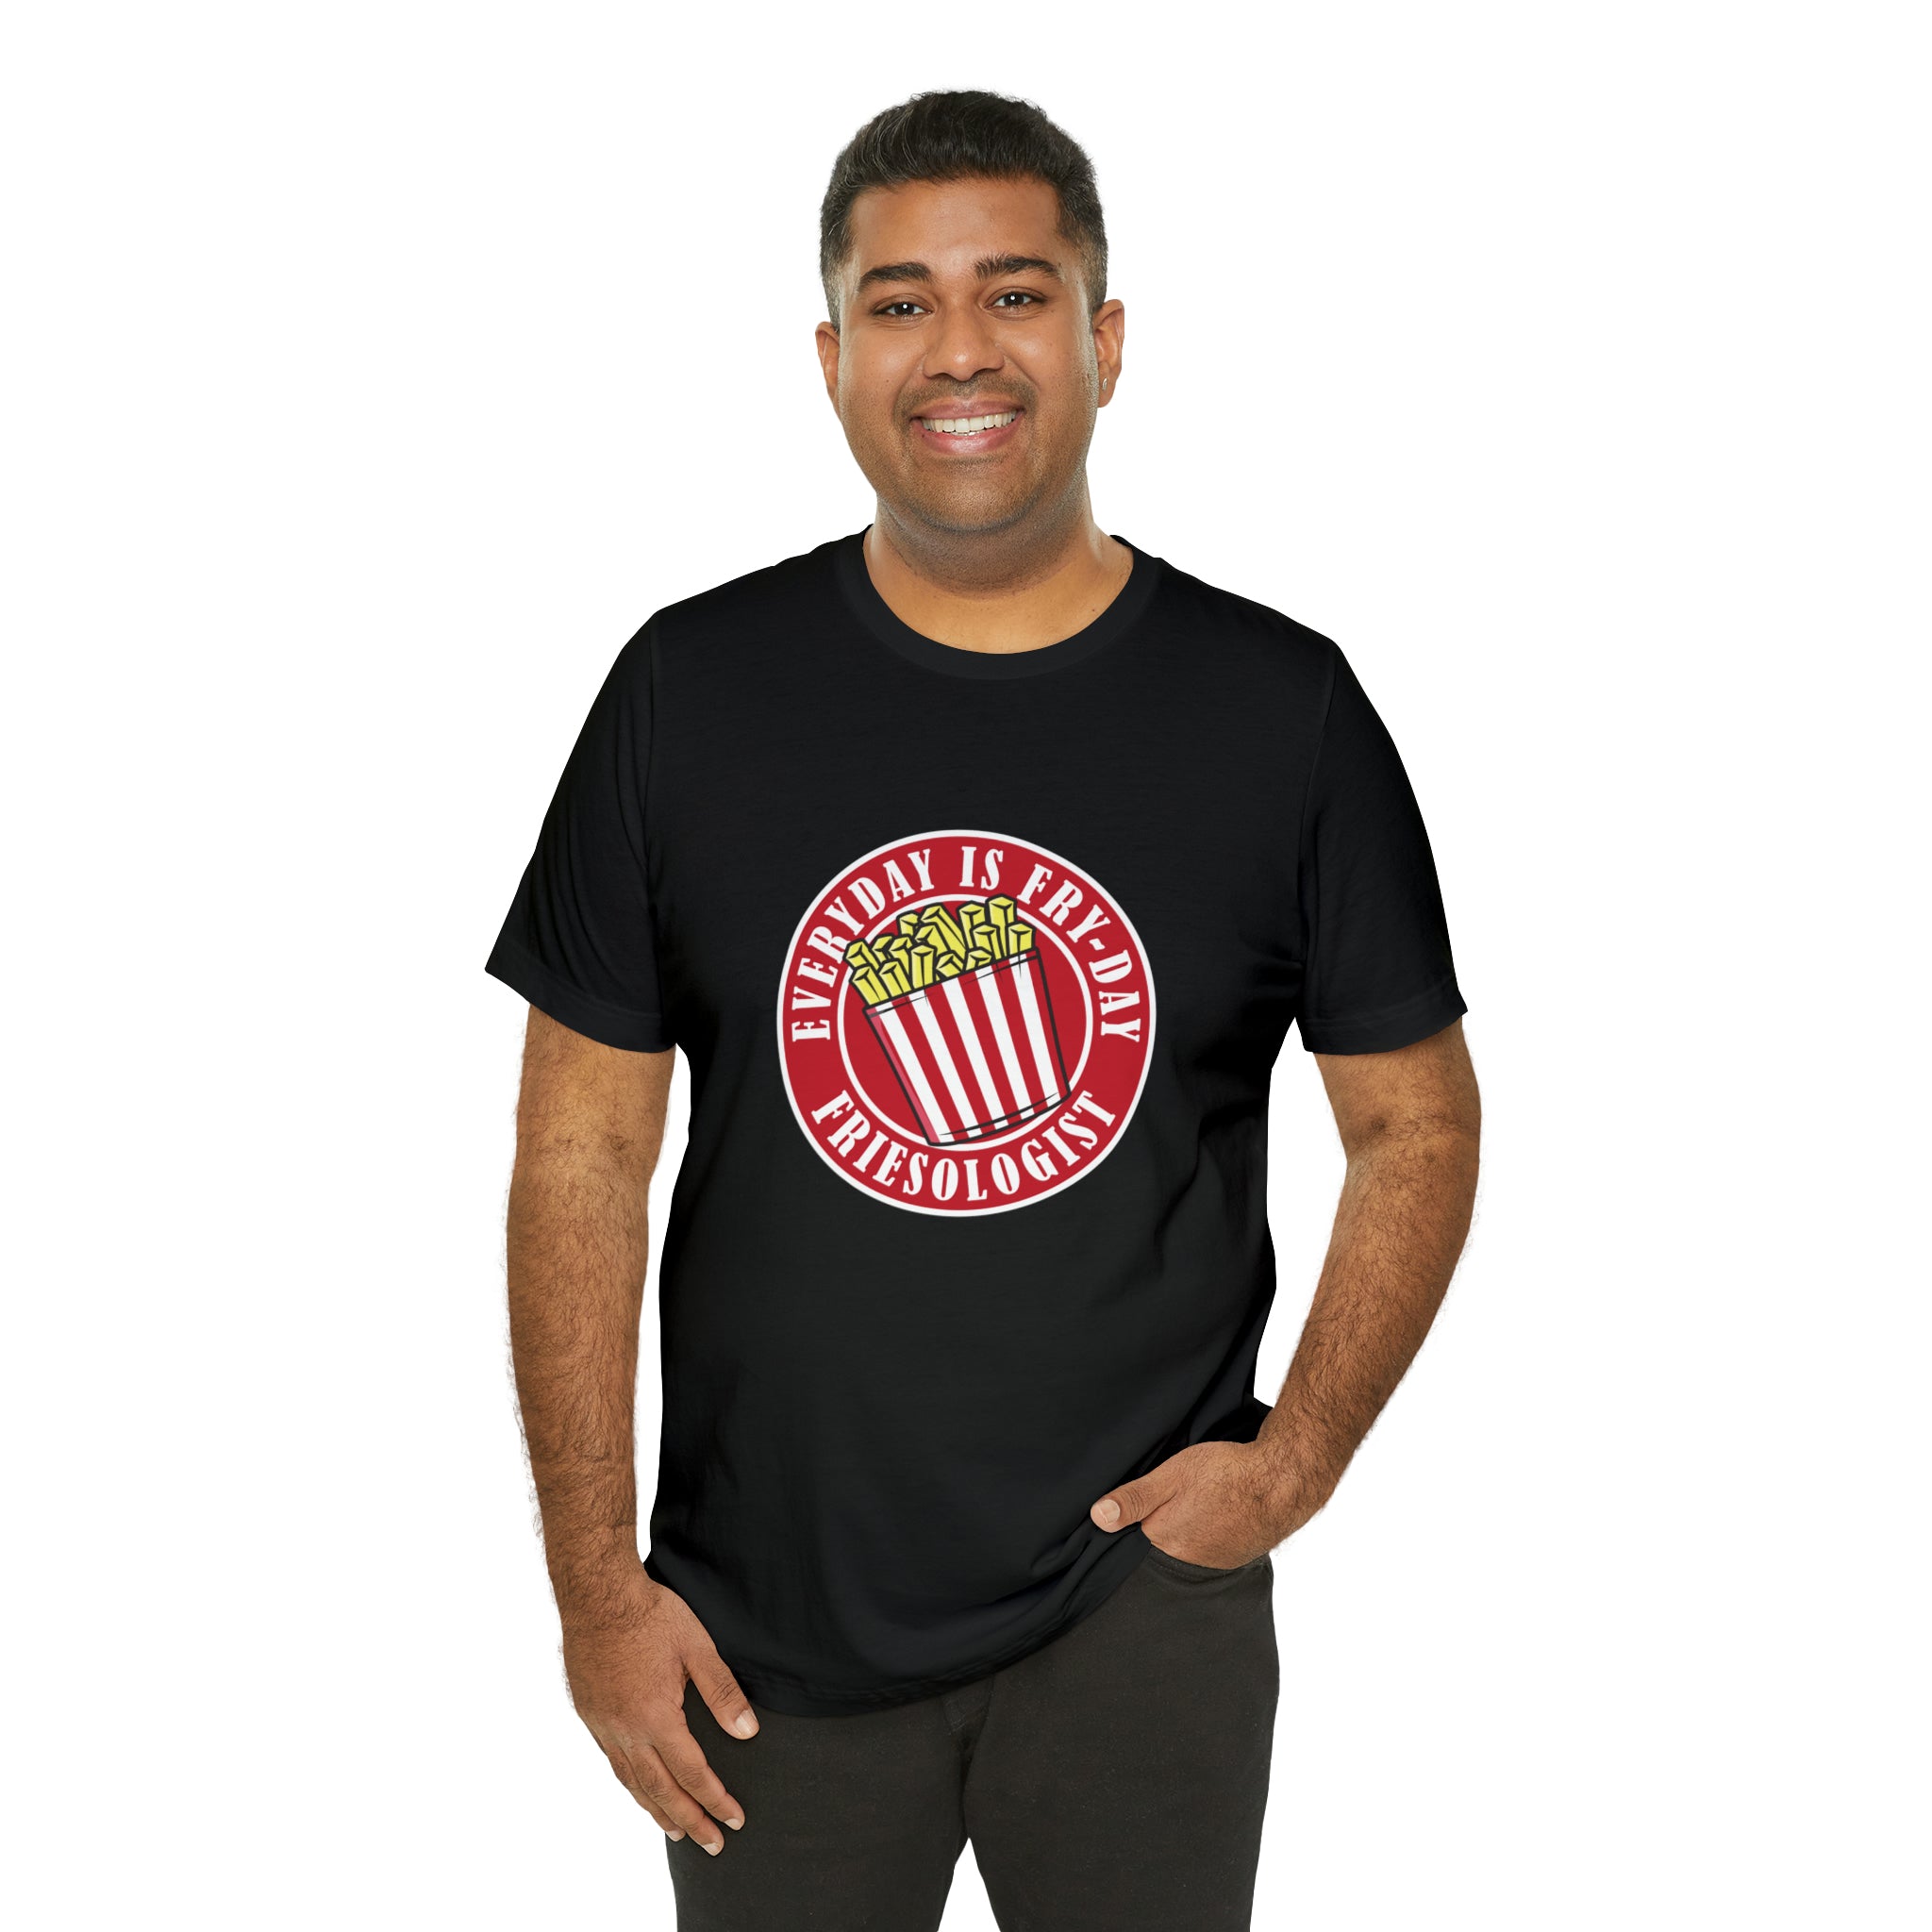 Everyday is Fry-day - Friesologist T-Shirt